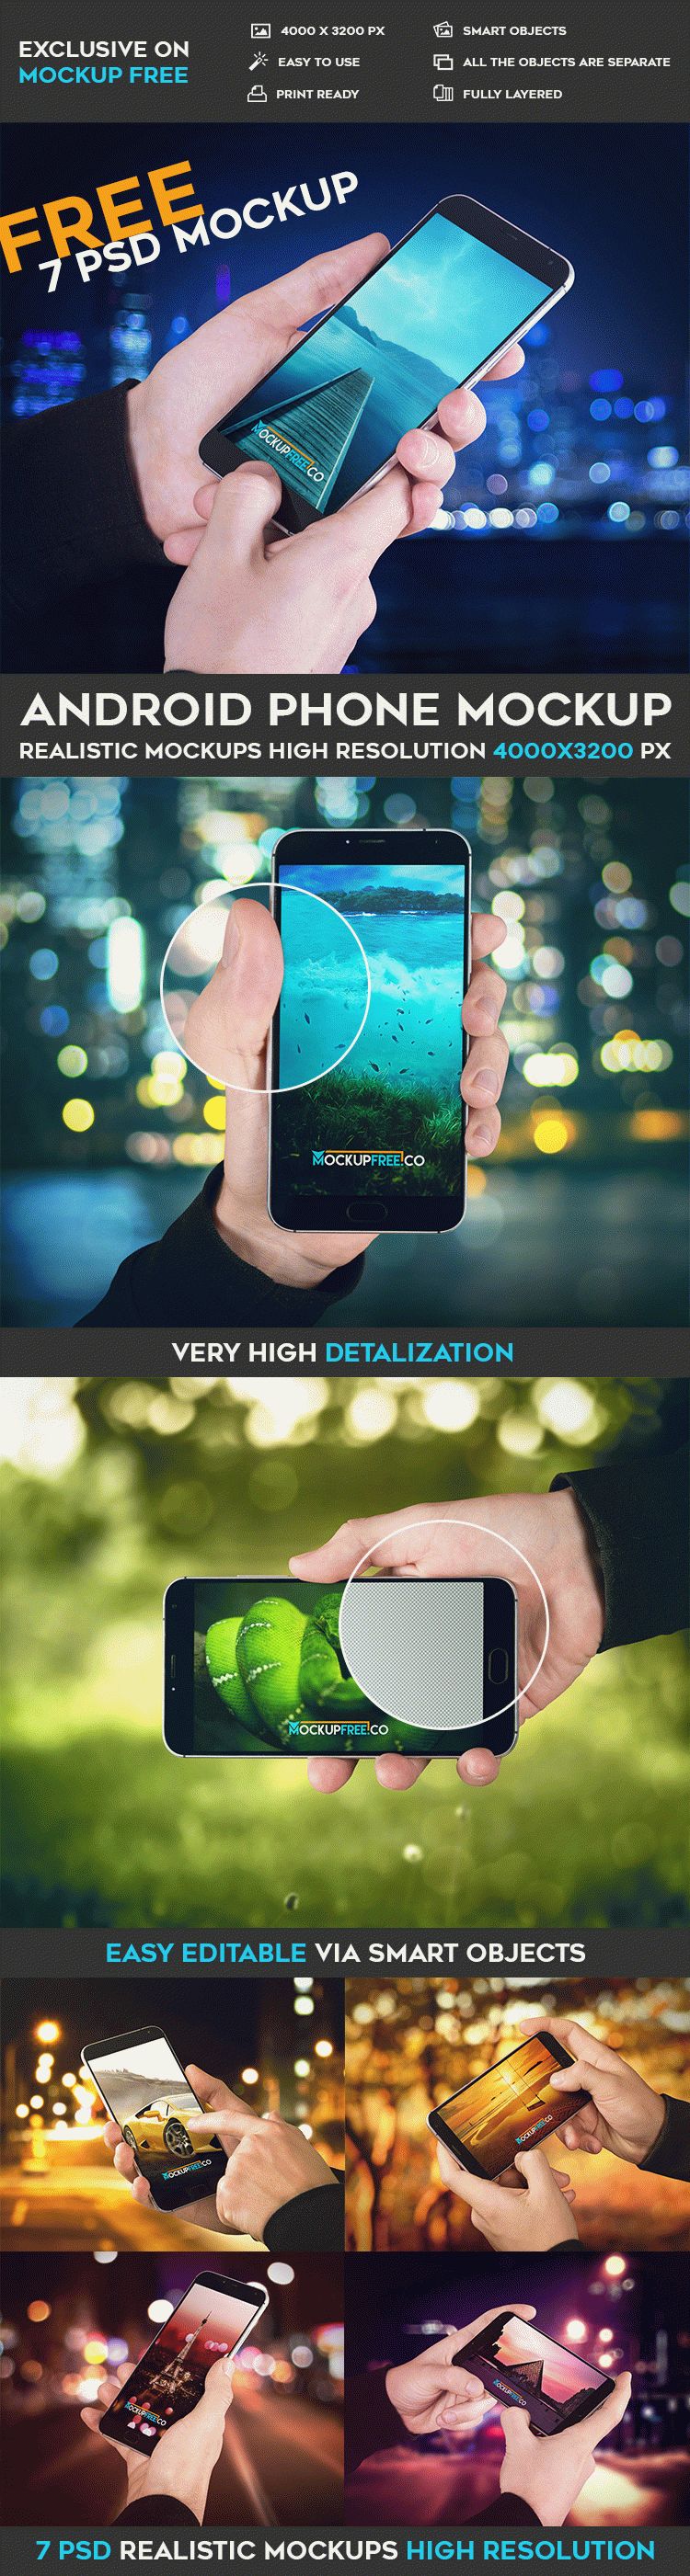 Android Phone - 7 Free PSD Mockups | Download